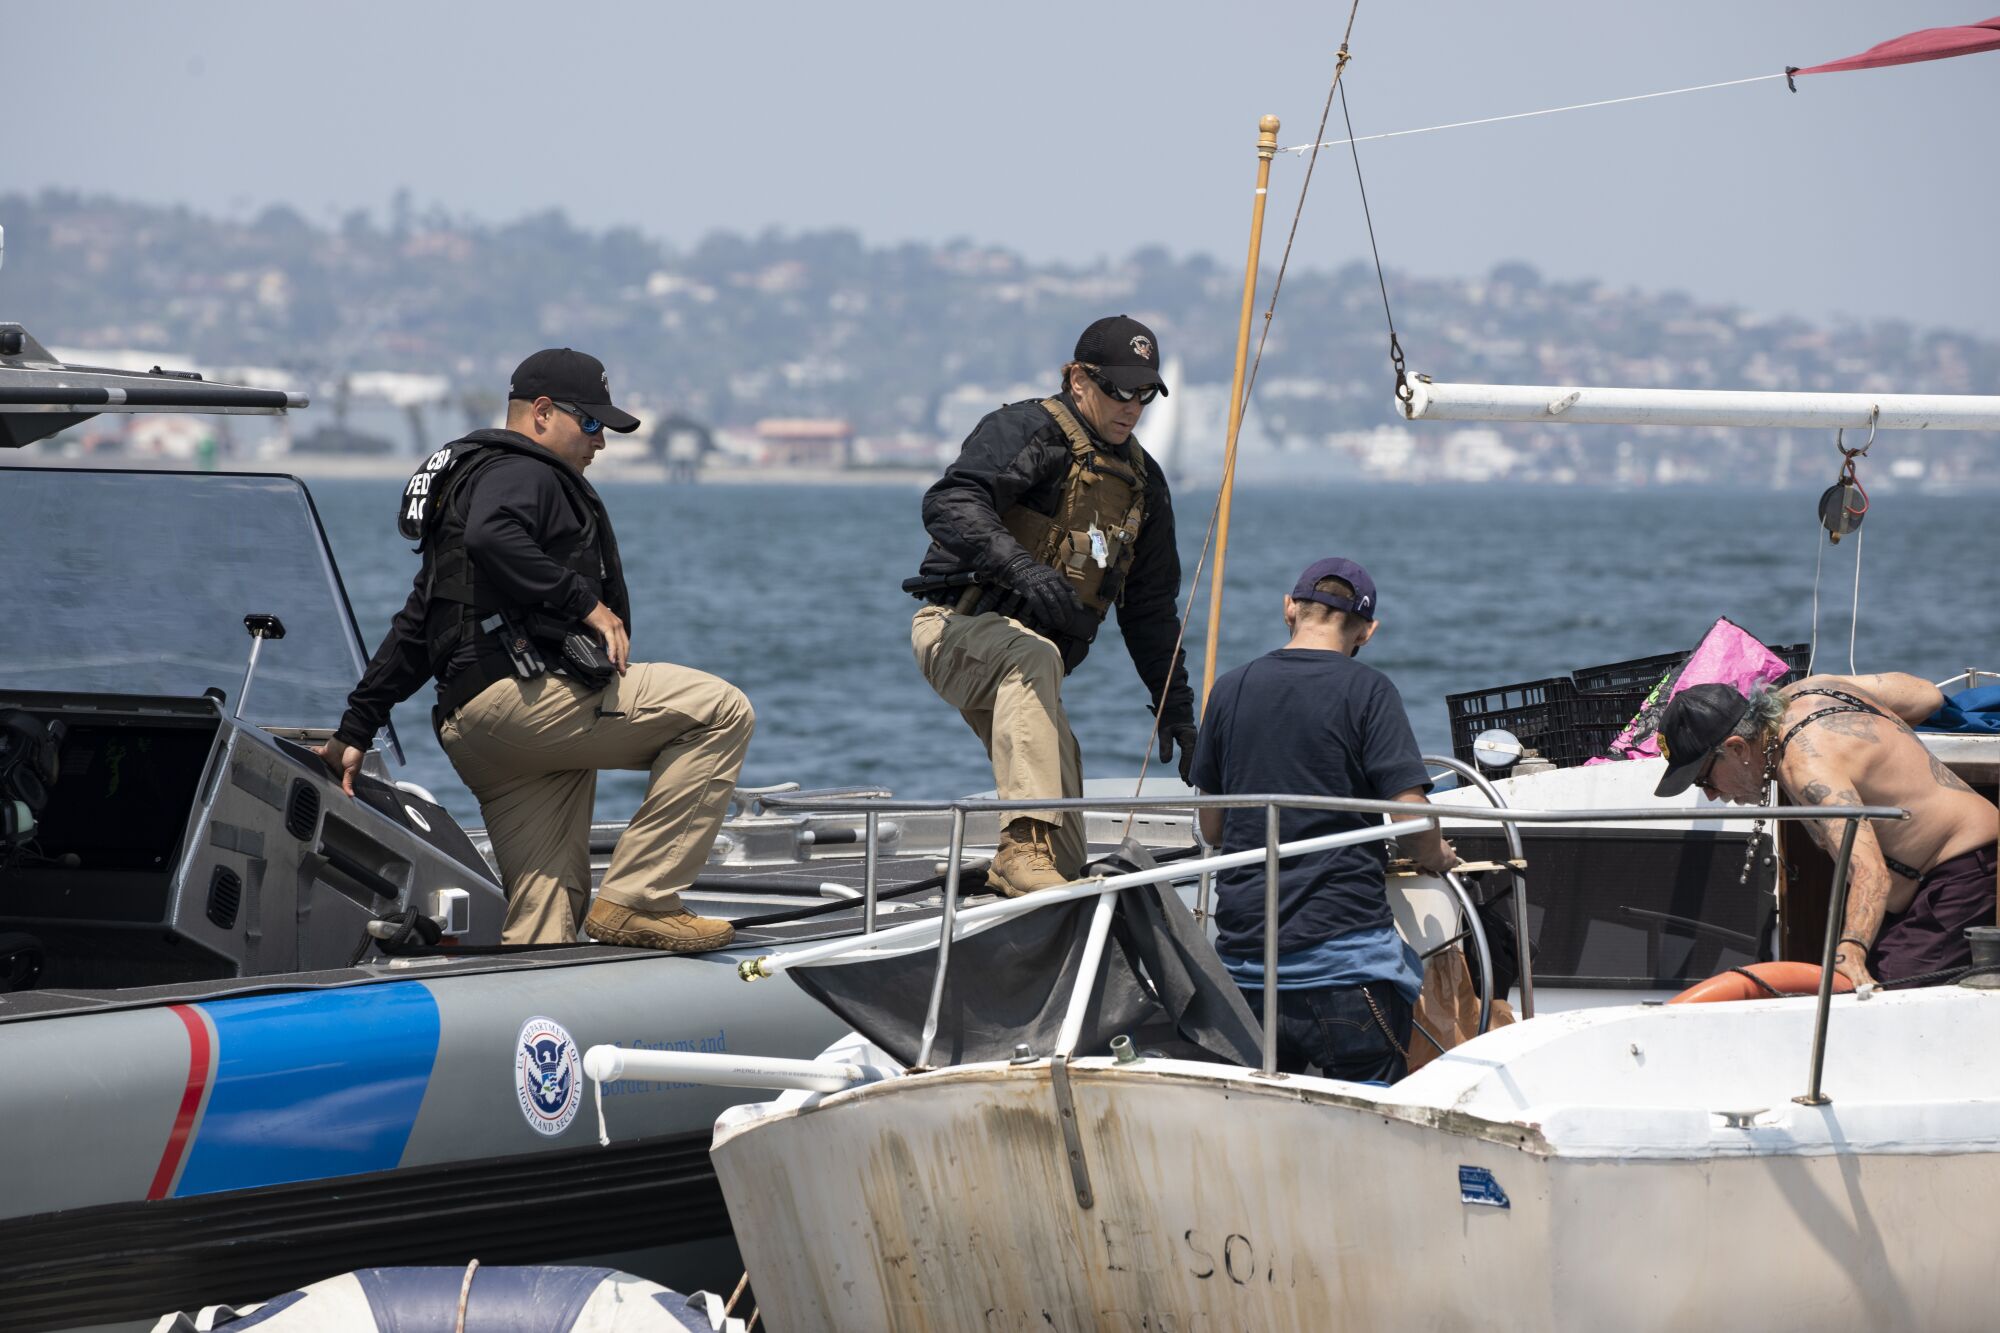 Marine interdiction agents board a sailboat from their boat after stopping the vessel.